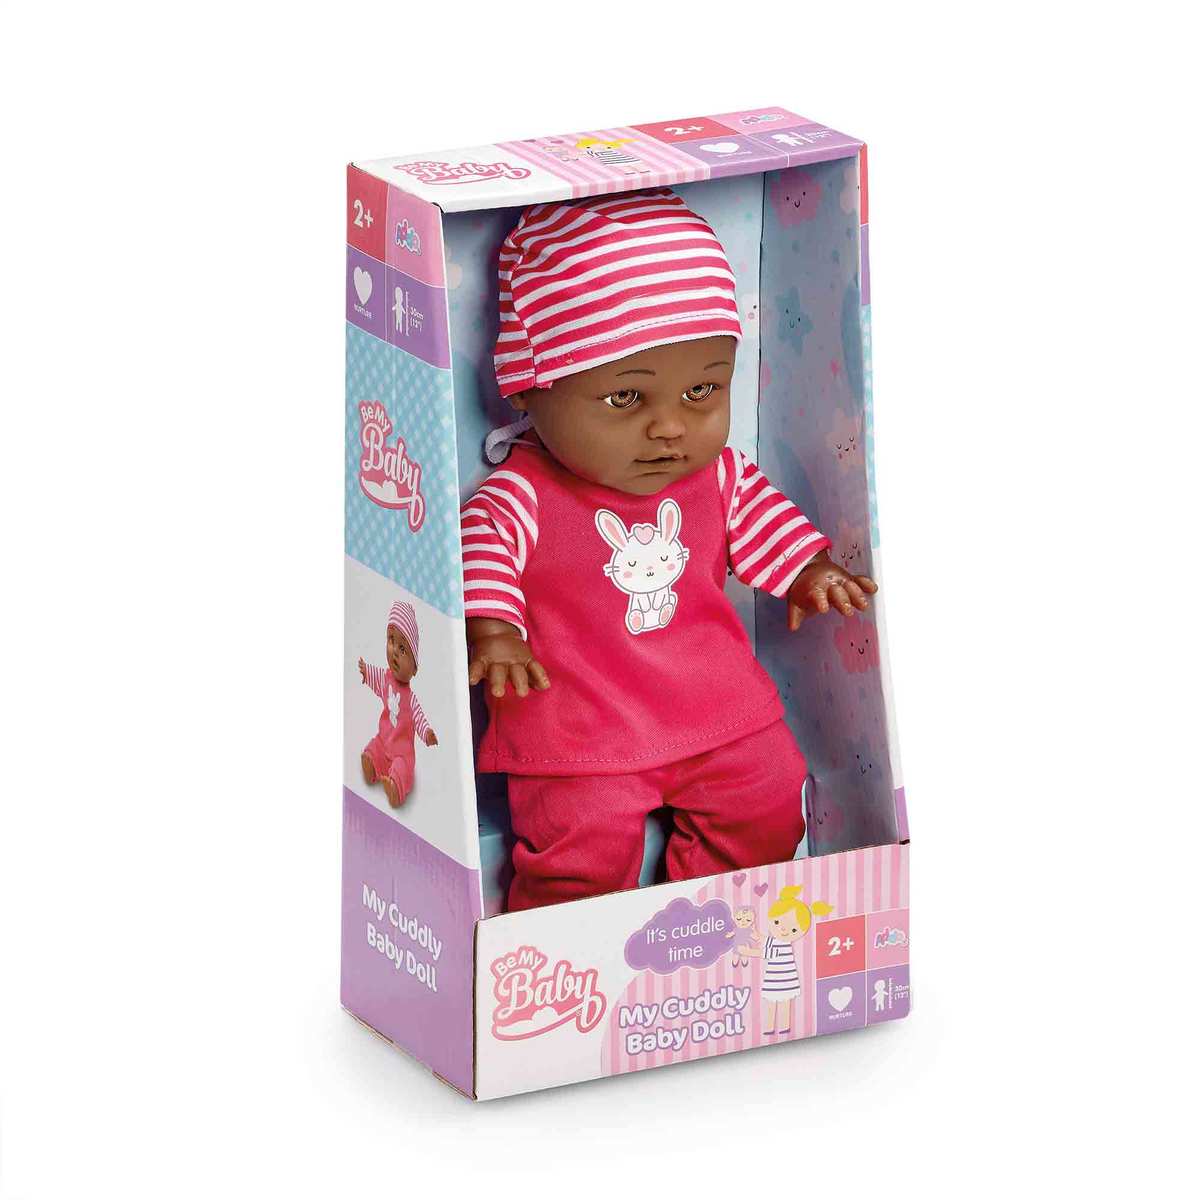 Be My Baby Cuddly Baby - Dark Pink Outfit